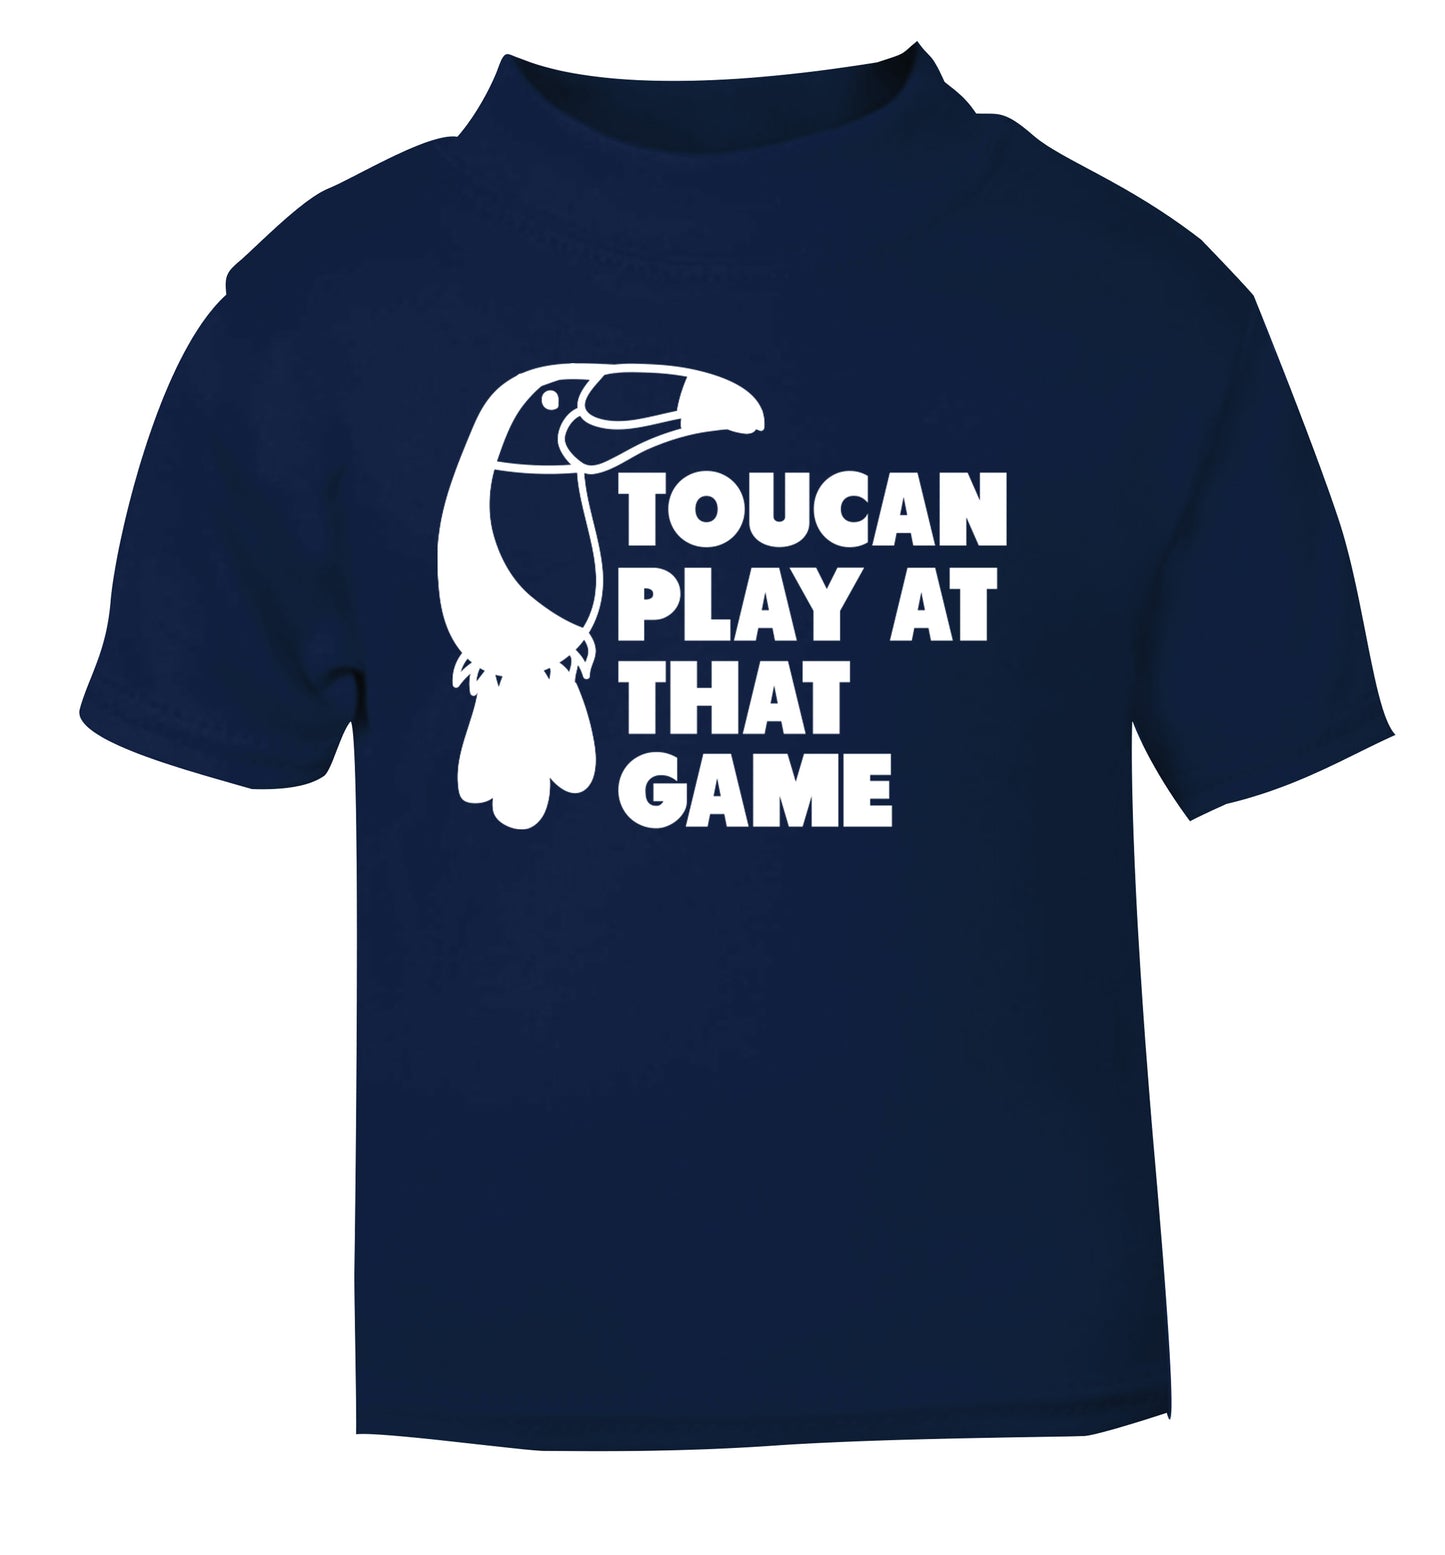 Toucan play at that game navy Baby Toddler Tshirt 2 Years